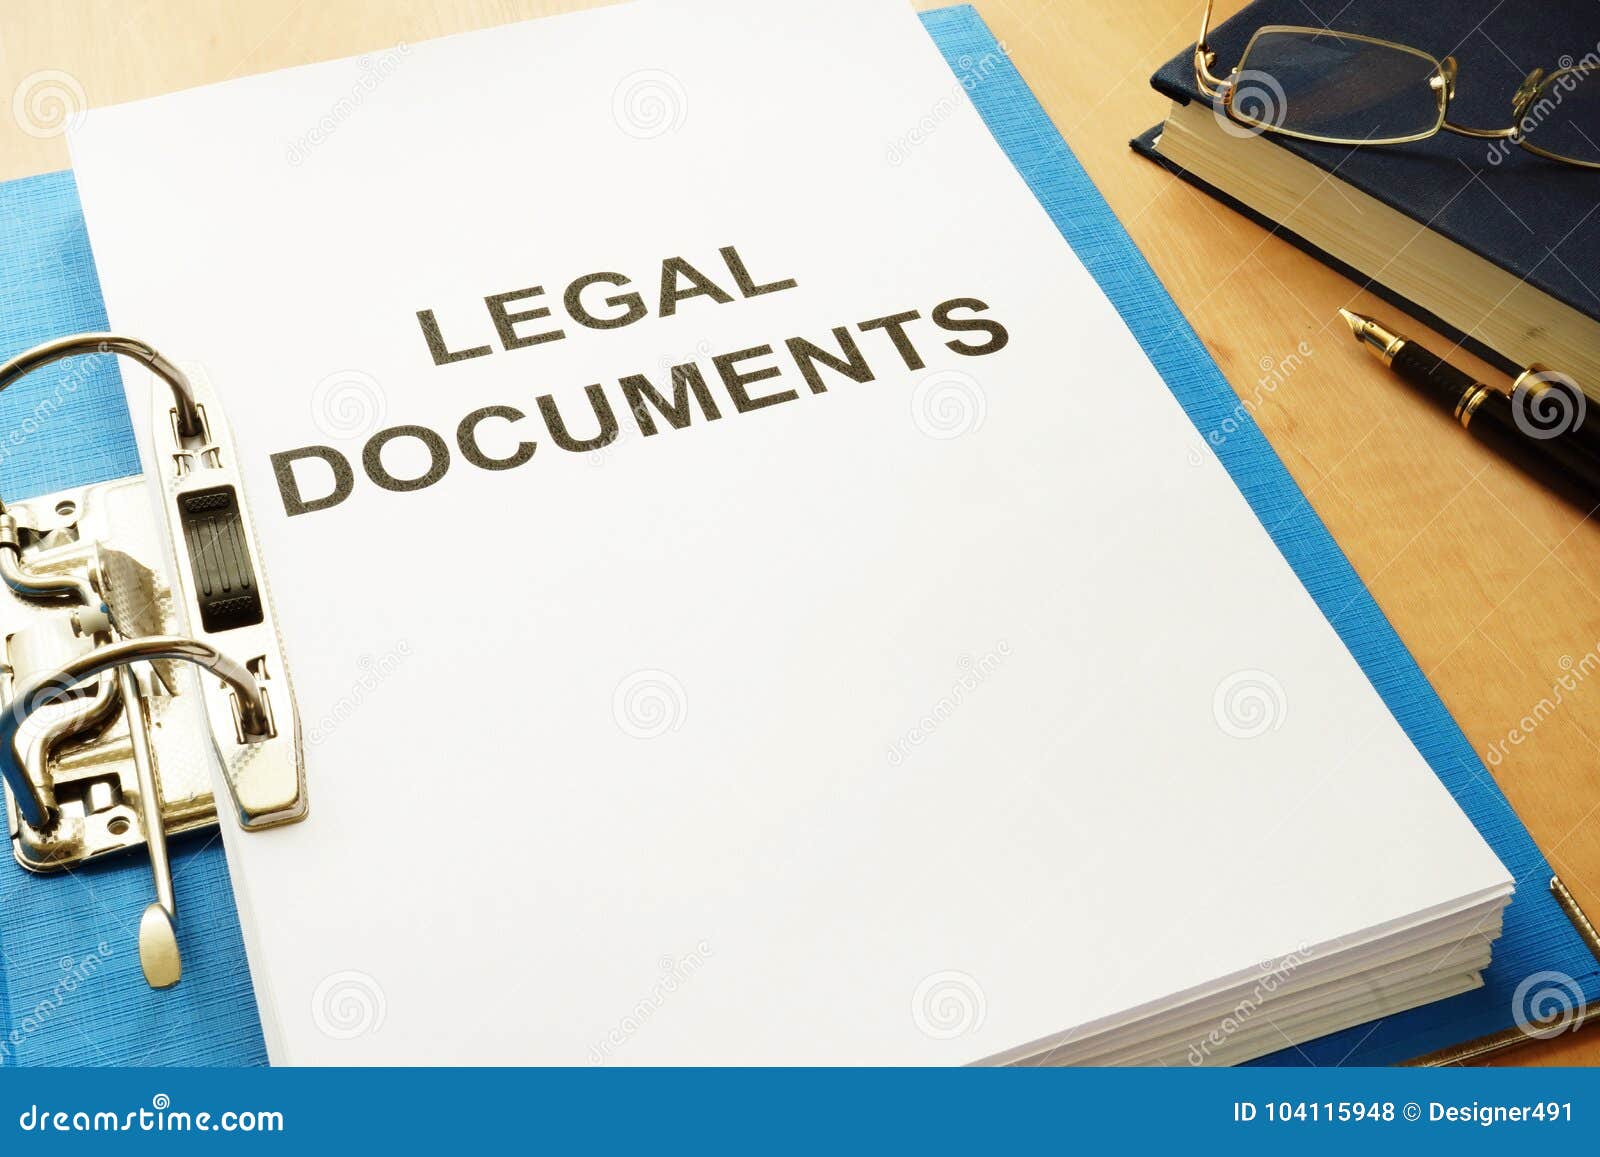 folder with title legal documents in an office.